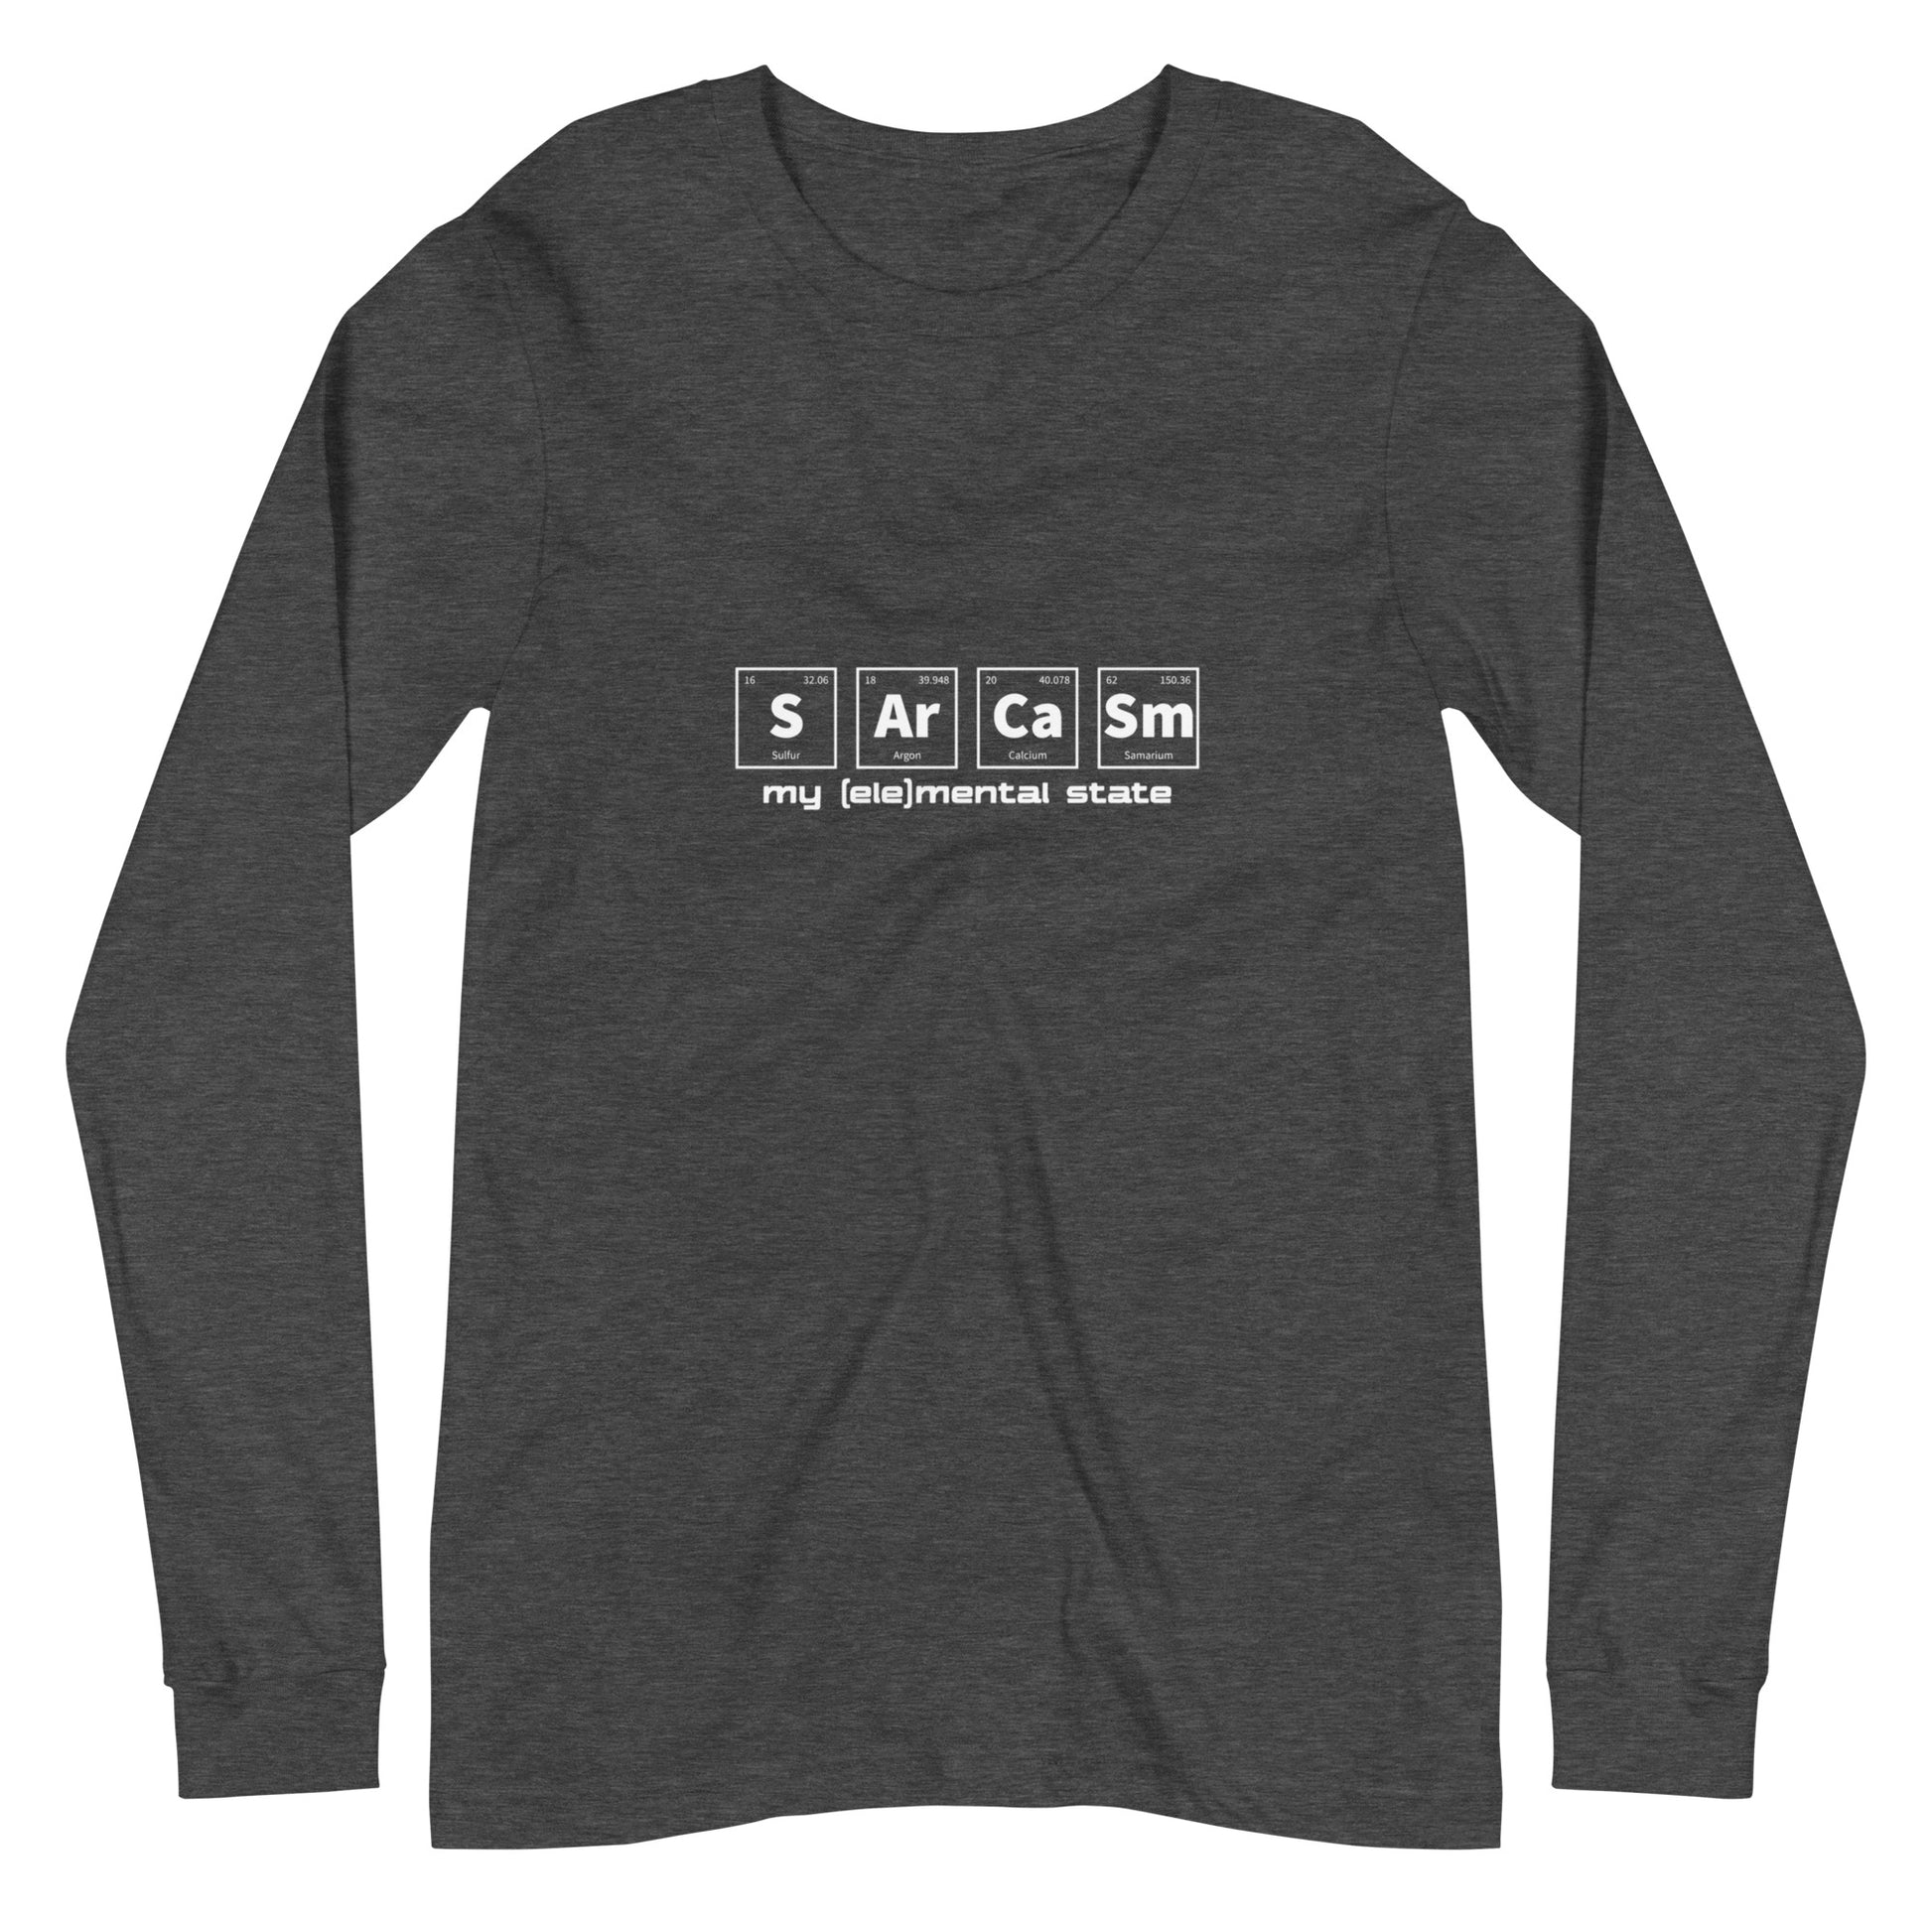 Dark Grey Heather long sleeve t-shirt with graphic of periodic table of elements symbols for Sulfur (S), Argon (Ar), Calcium (Ca), and Samarium (Sm) and text "my (ele)mental state"